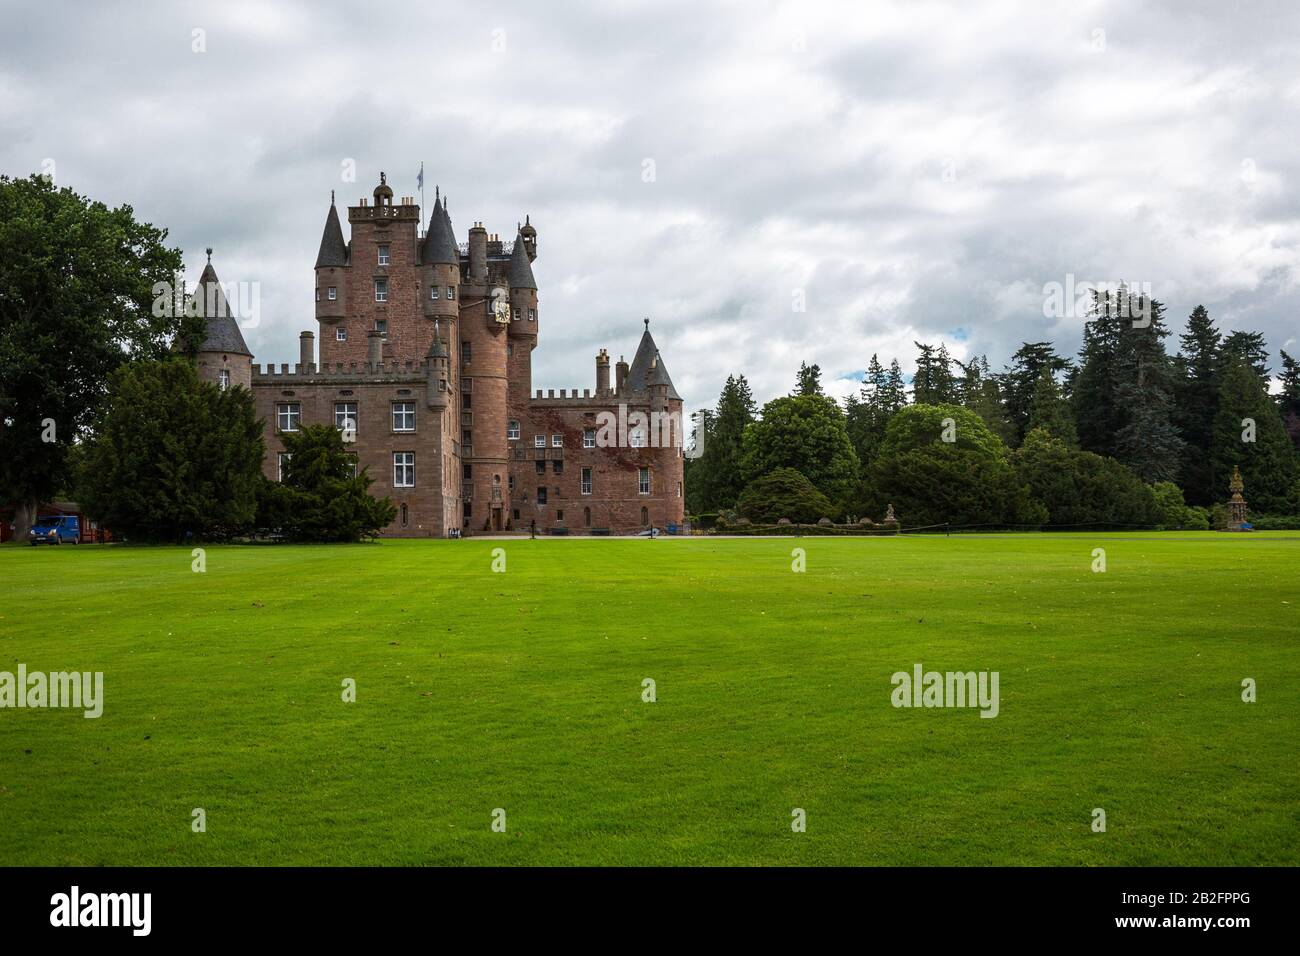 Great Britain, Scotland, Fife area, Angus, the Glamis castle, childhood home of the Queen Elizabeth. Stock Photo